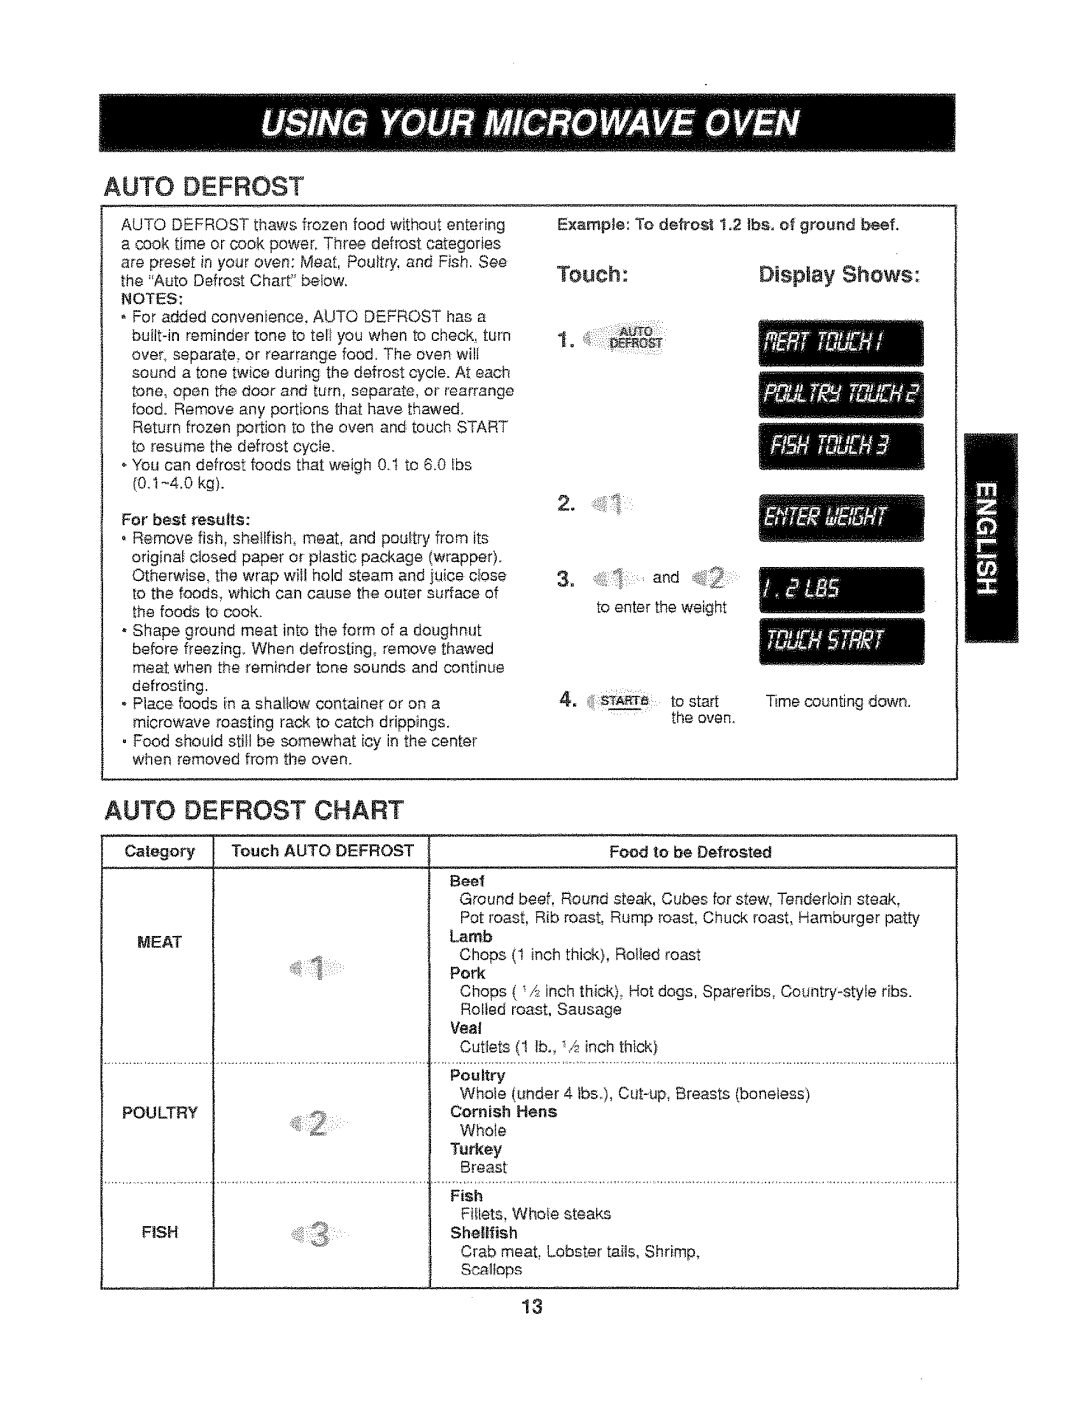 Kenmore 721.61282, 721.61289 manual Auto Defrost Chart, DispRay Shews, Touch 